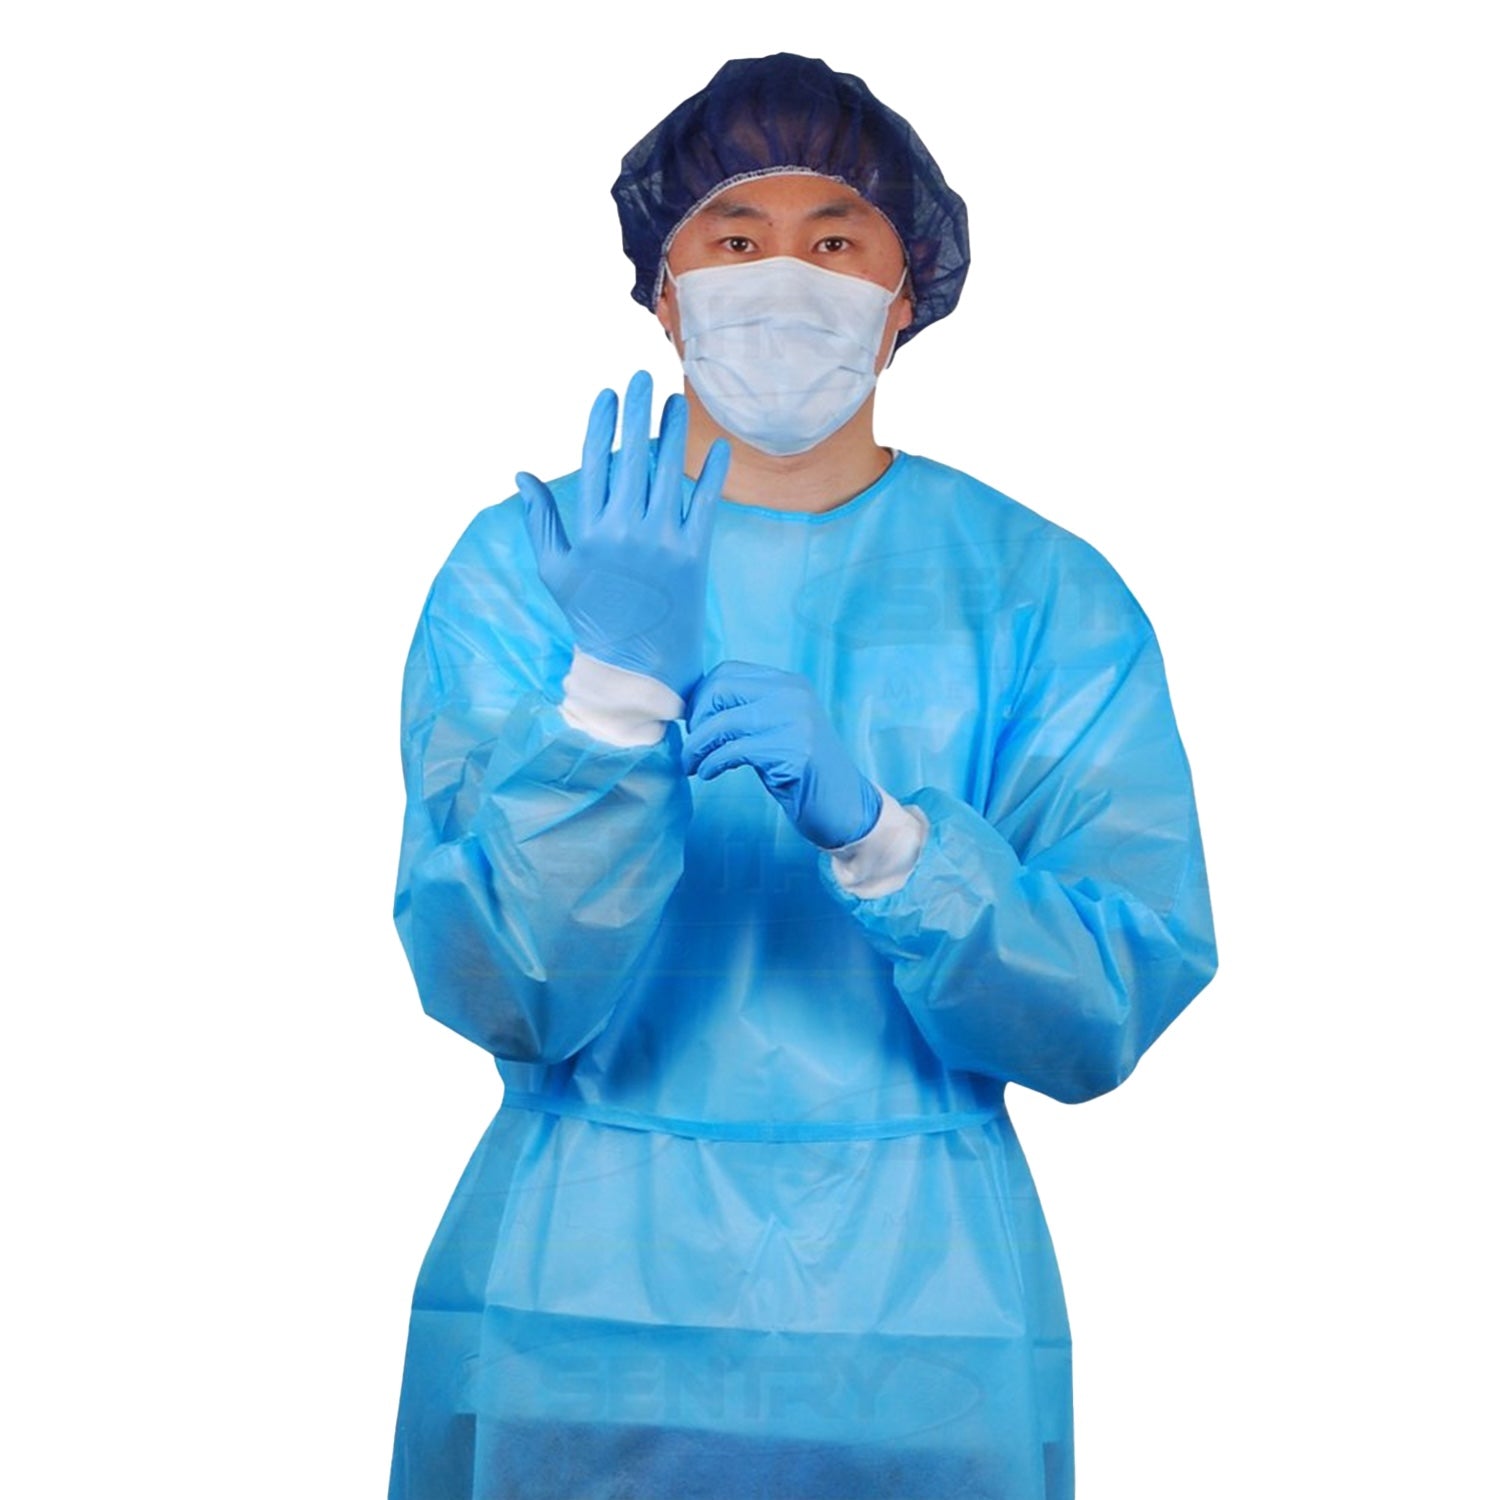 Barrier Impervious Gown | Blue | Pack of 50 (1)